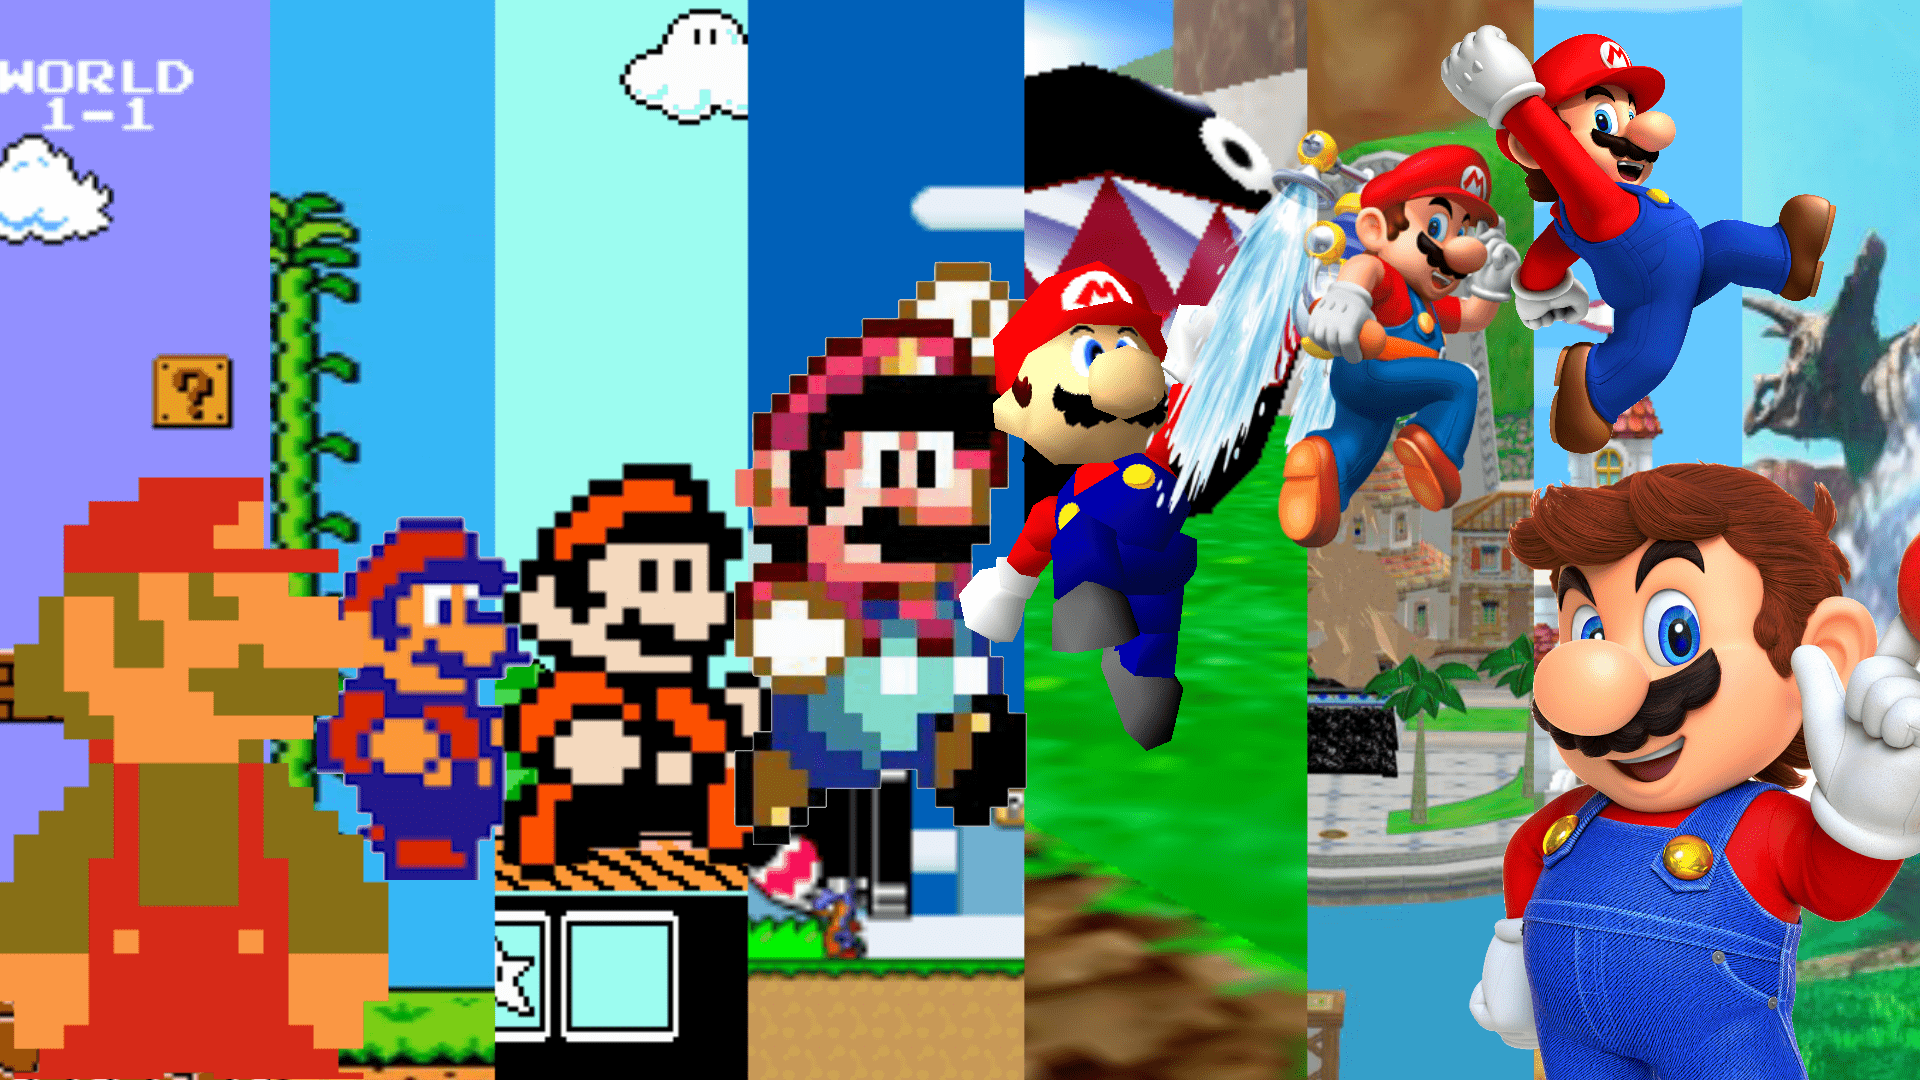 A collage of Mario in different video games. - Super Mario